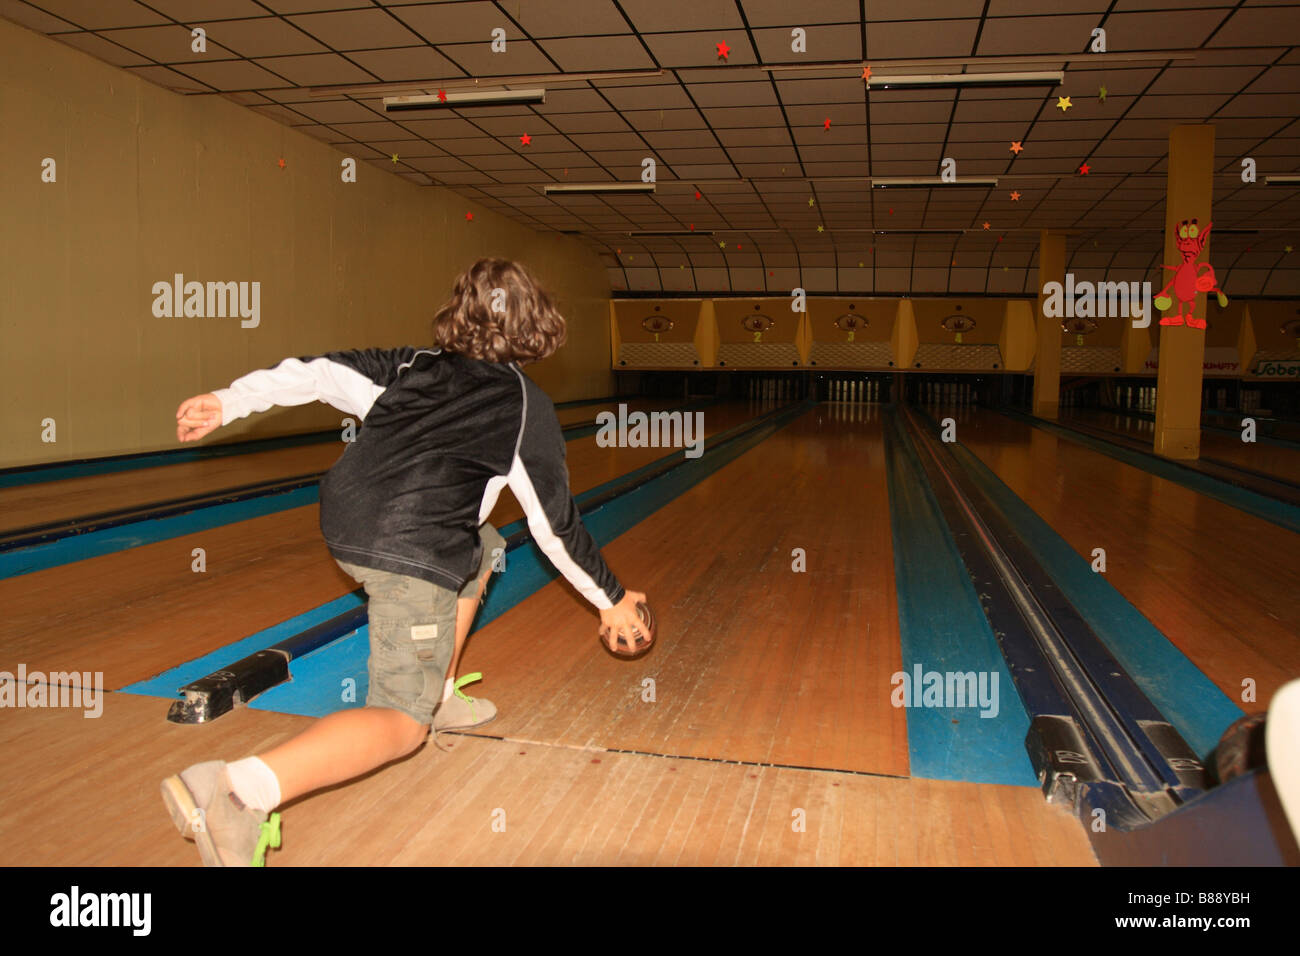 a 7 year old girl bowling at a bowling alley Stock Photo